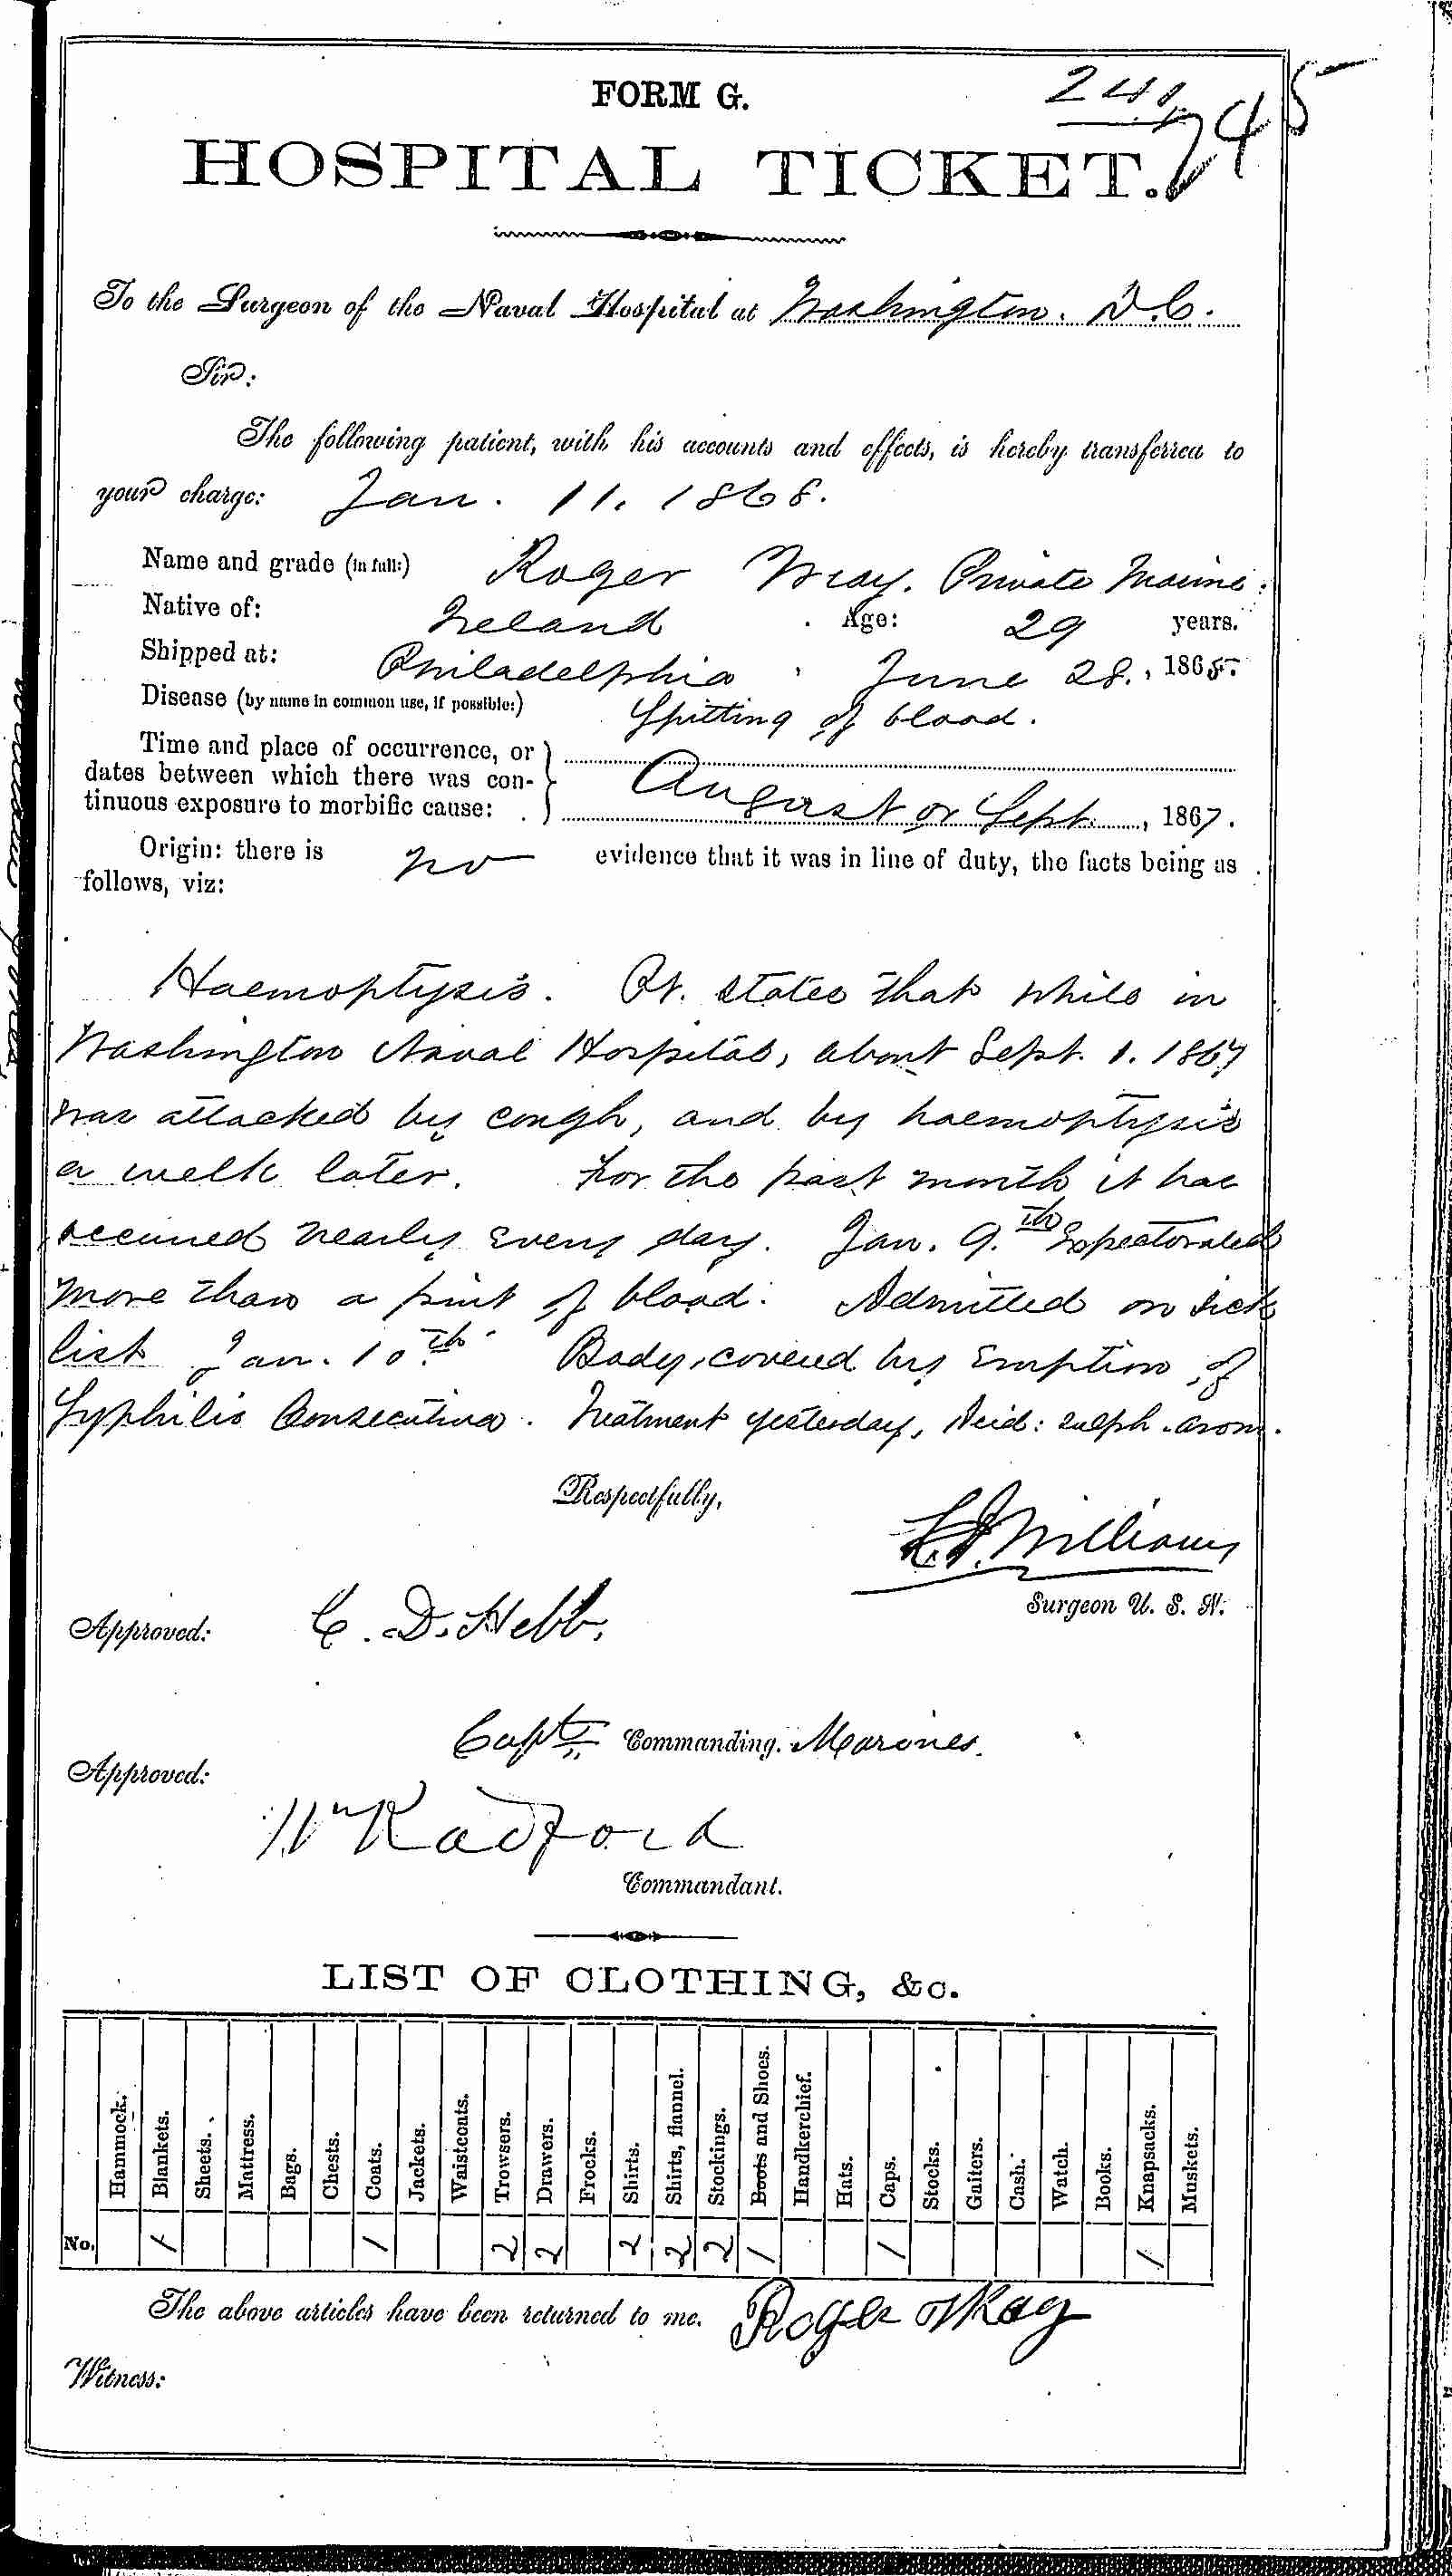 Entry for Rogers Wray (second admission page 1 of 2) in the log Hospital Tickets and Case Papers - Naval Hospital - Washington, D.C. - 1866-68